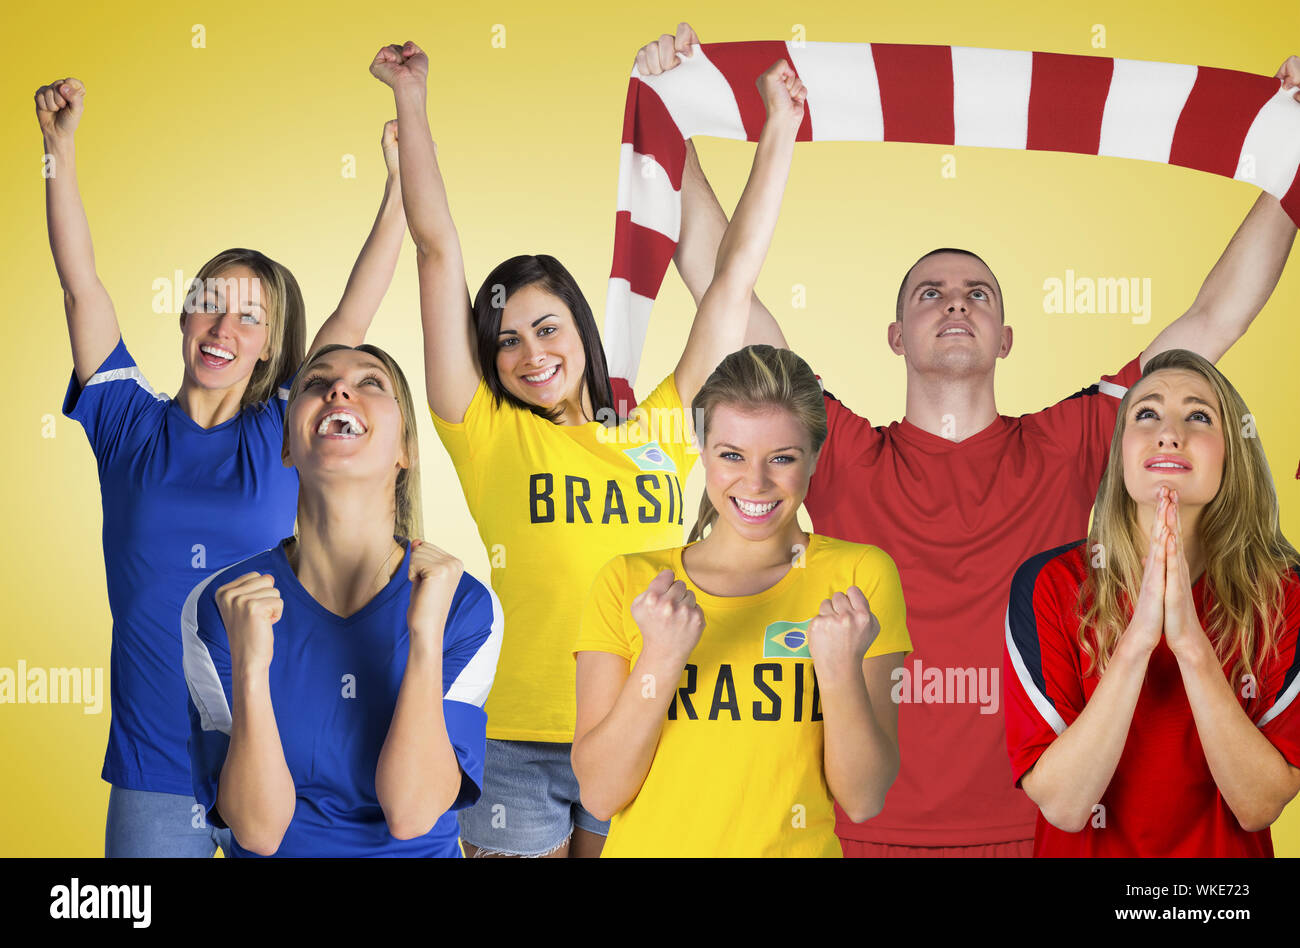 Composite image of football fans against yellow vignette Stock Photo